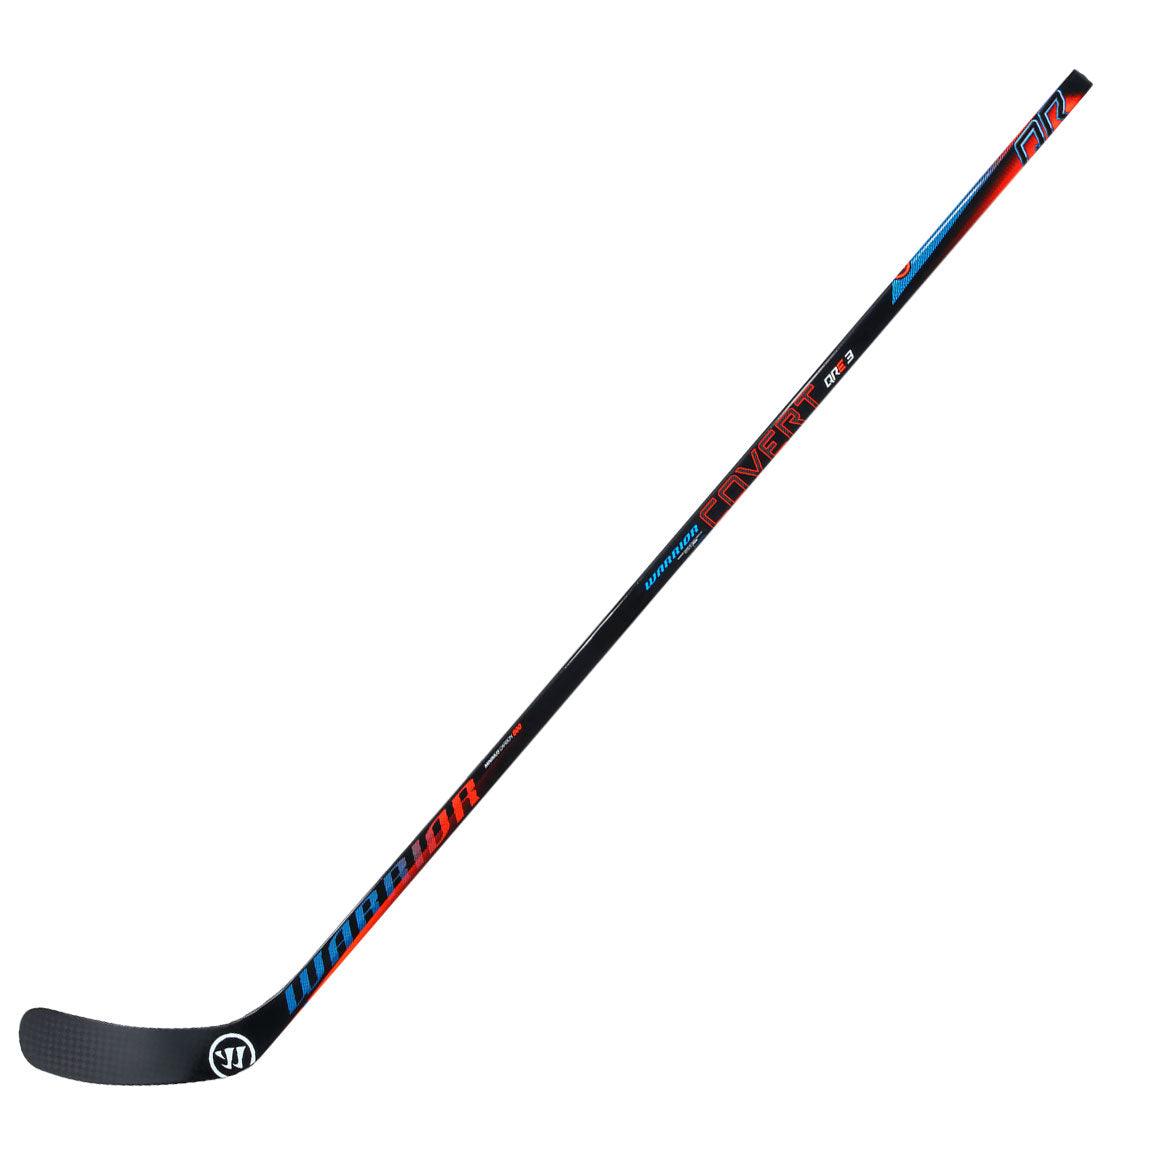 Covert QRE 3 Hockey Stick - Senior - Sports Excellence